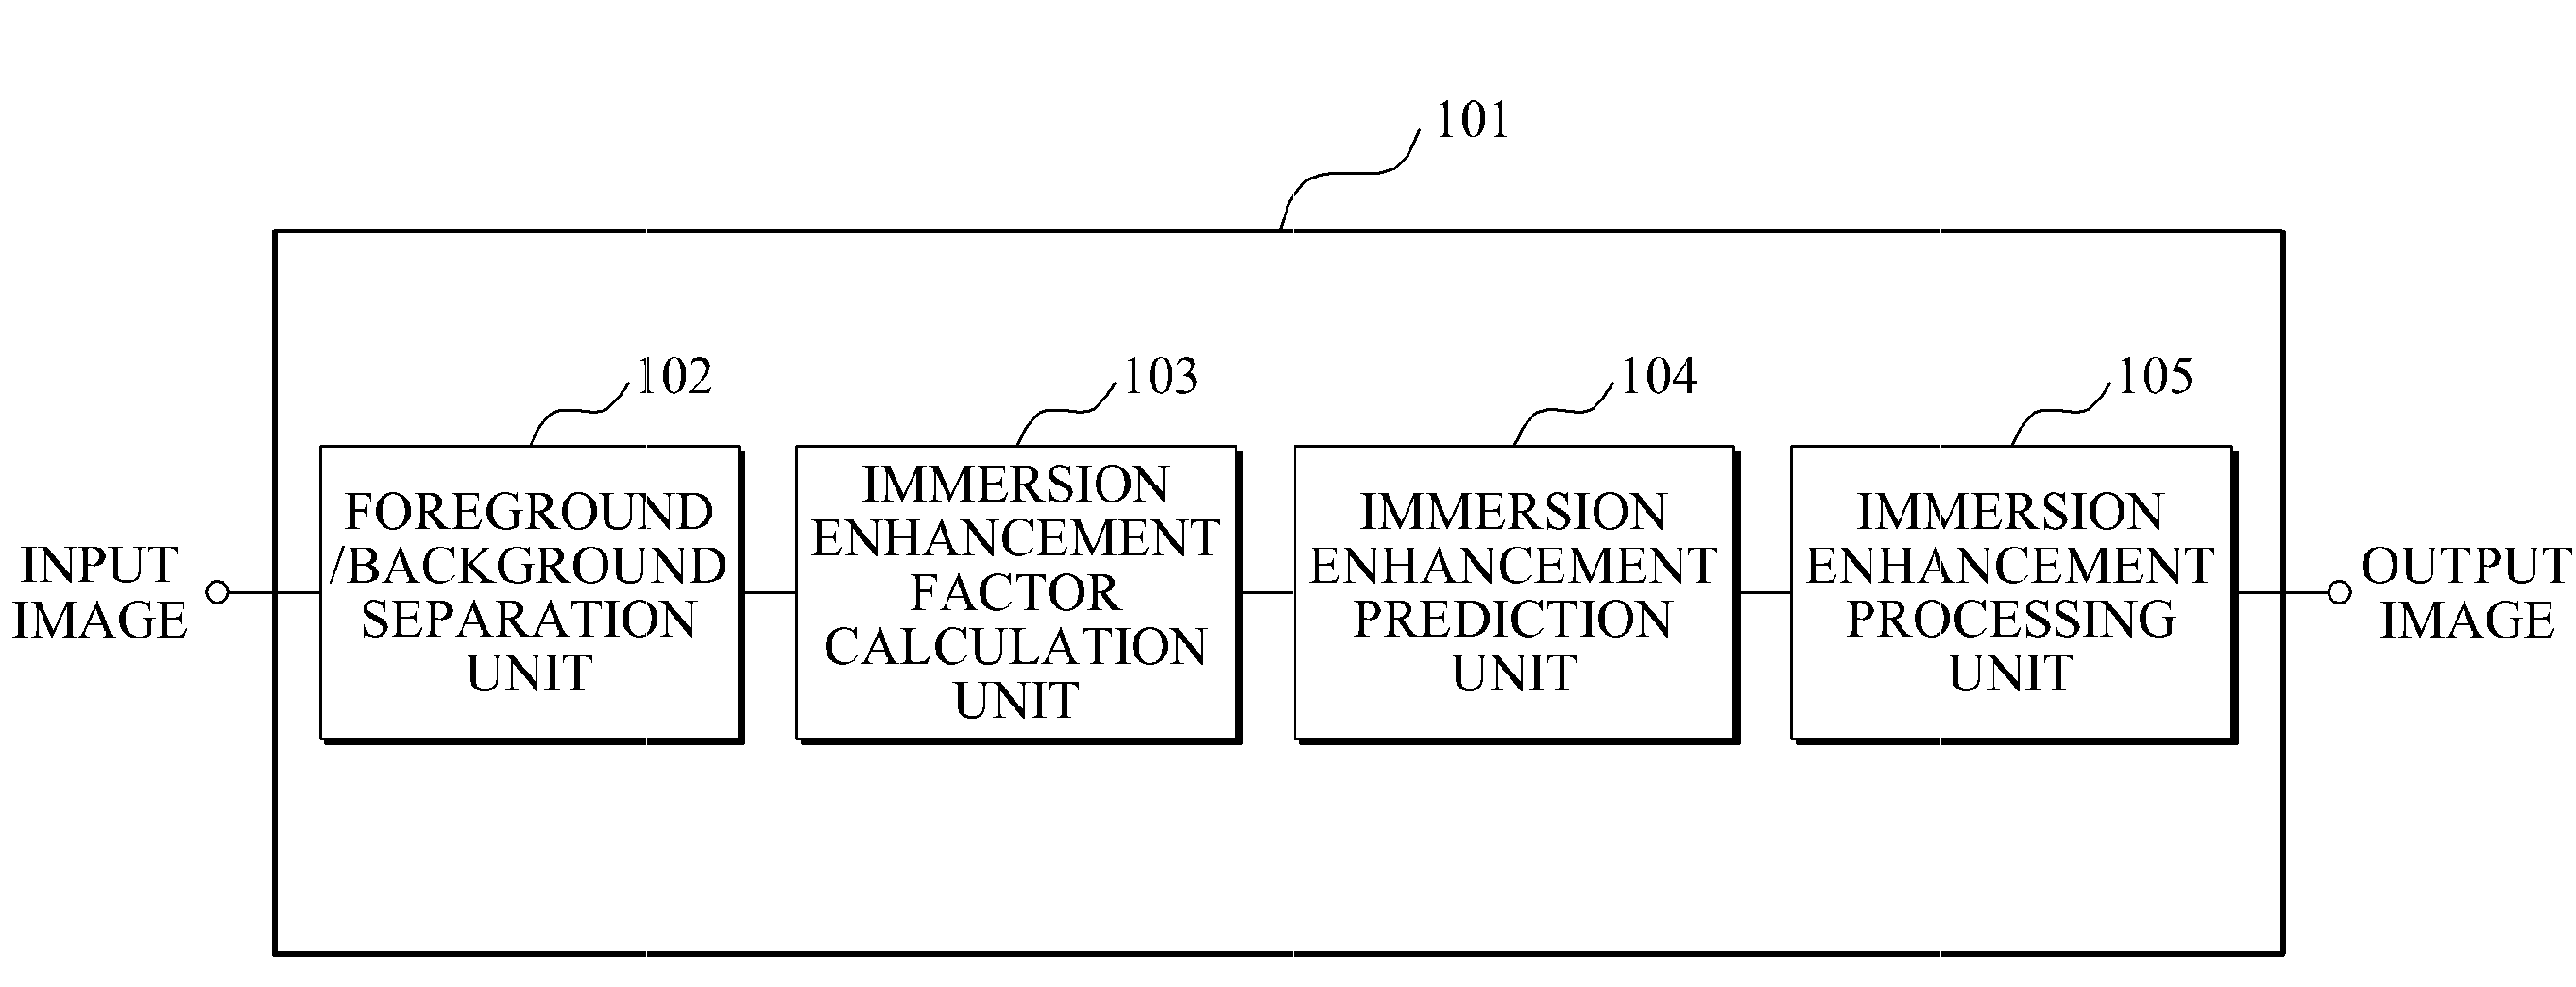 System and method for immersion enhancement based on adaptive immersion enhancement prediction